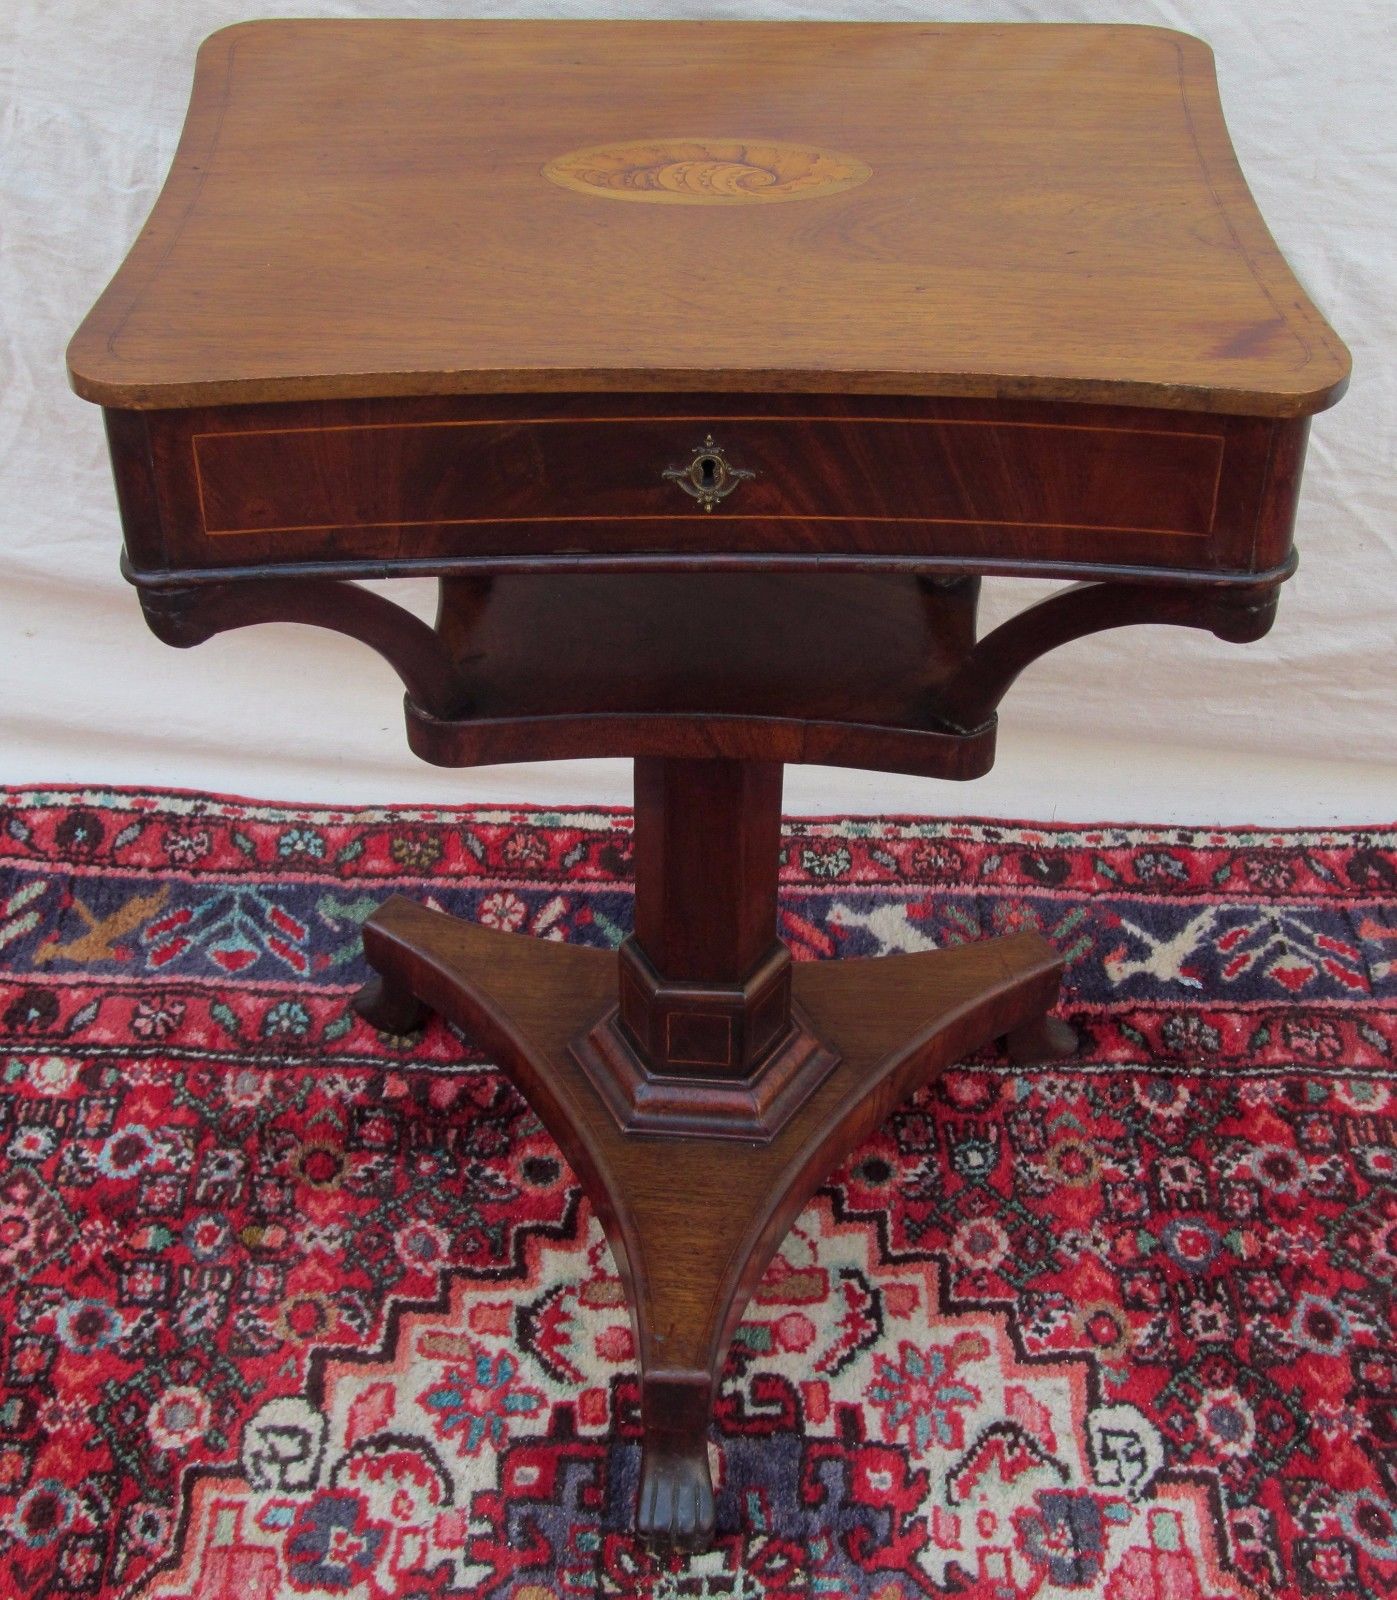 EARLY 19TH CENTURY REGENCY CONCH SHELL INLAID MAHOGANY SEWING TABLE